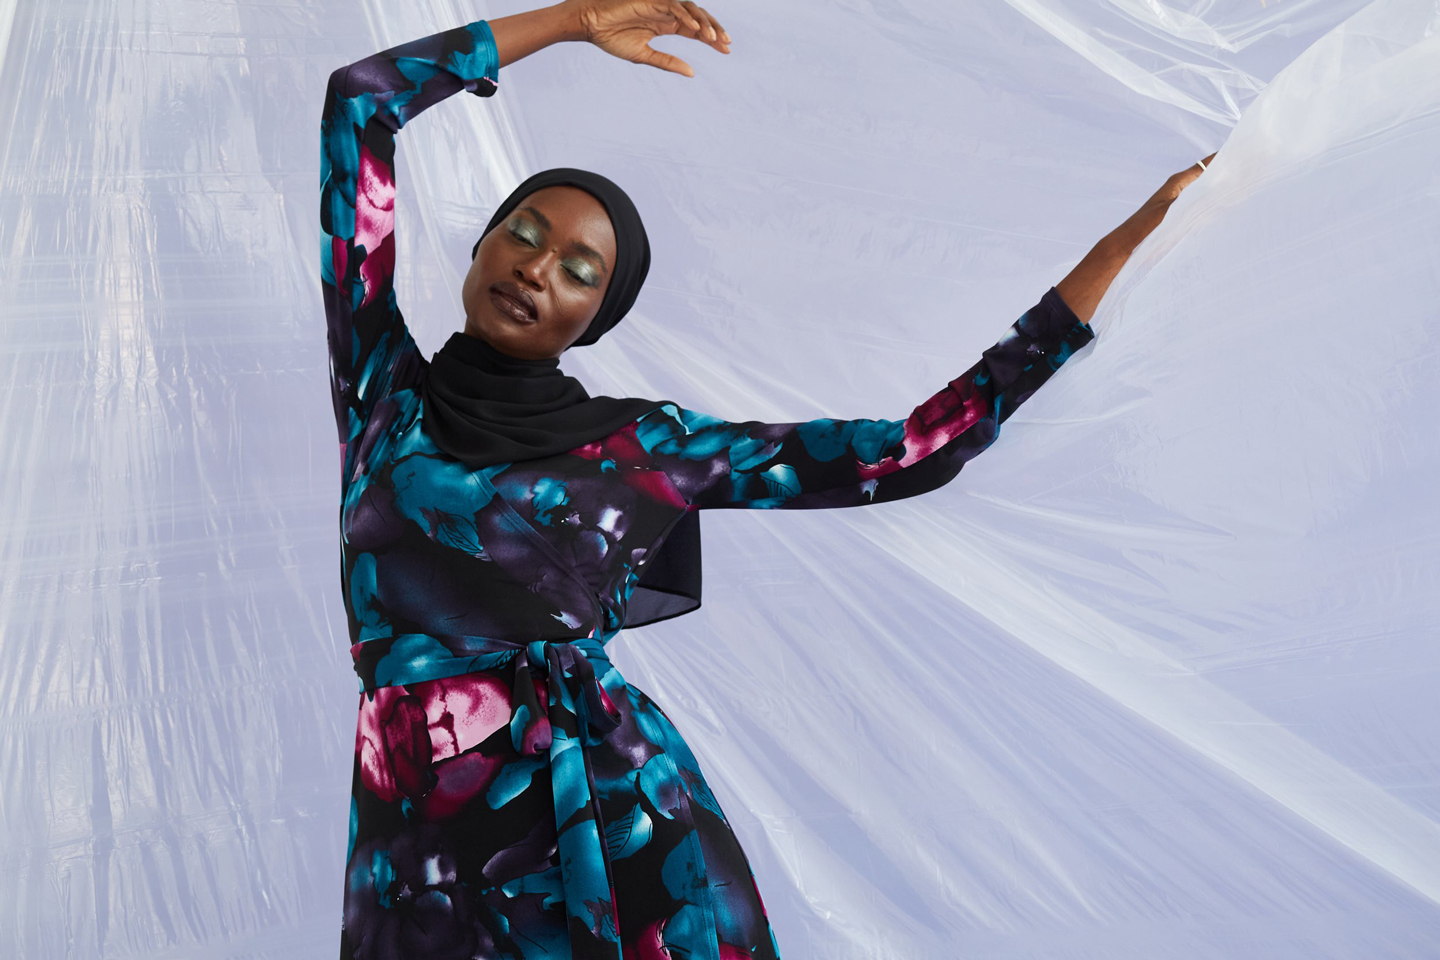 An editorial campaign by modest fashion brand Louella